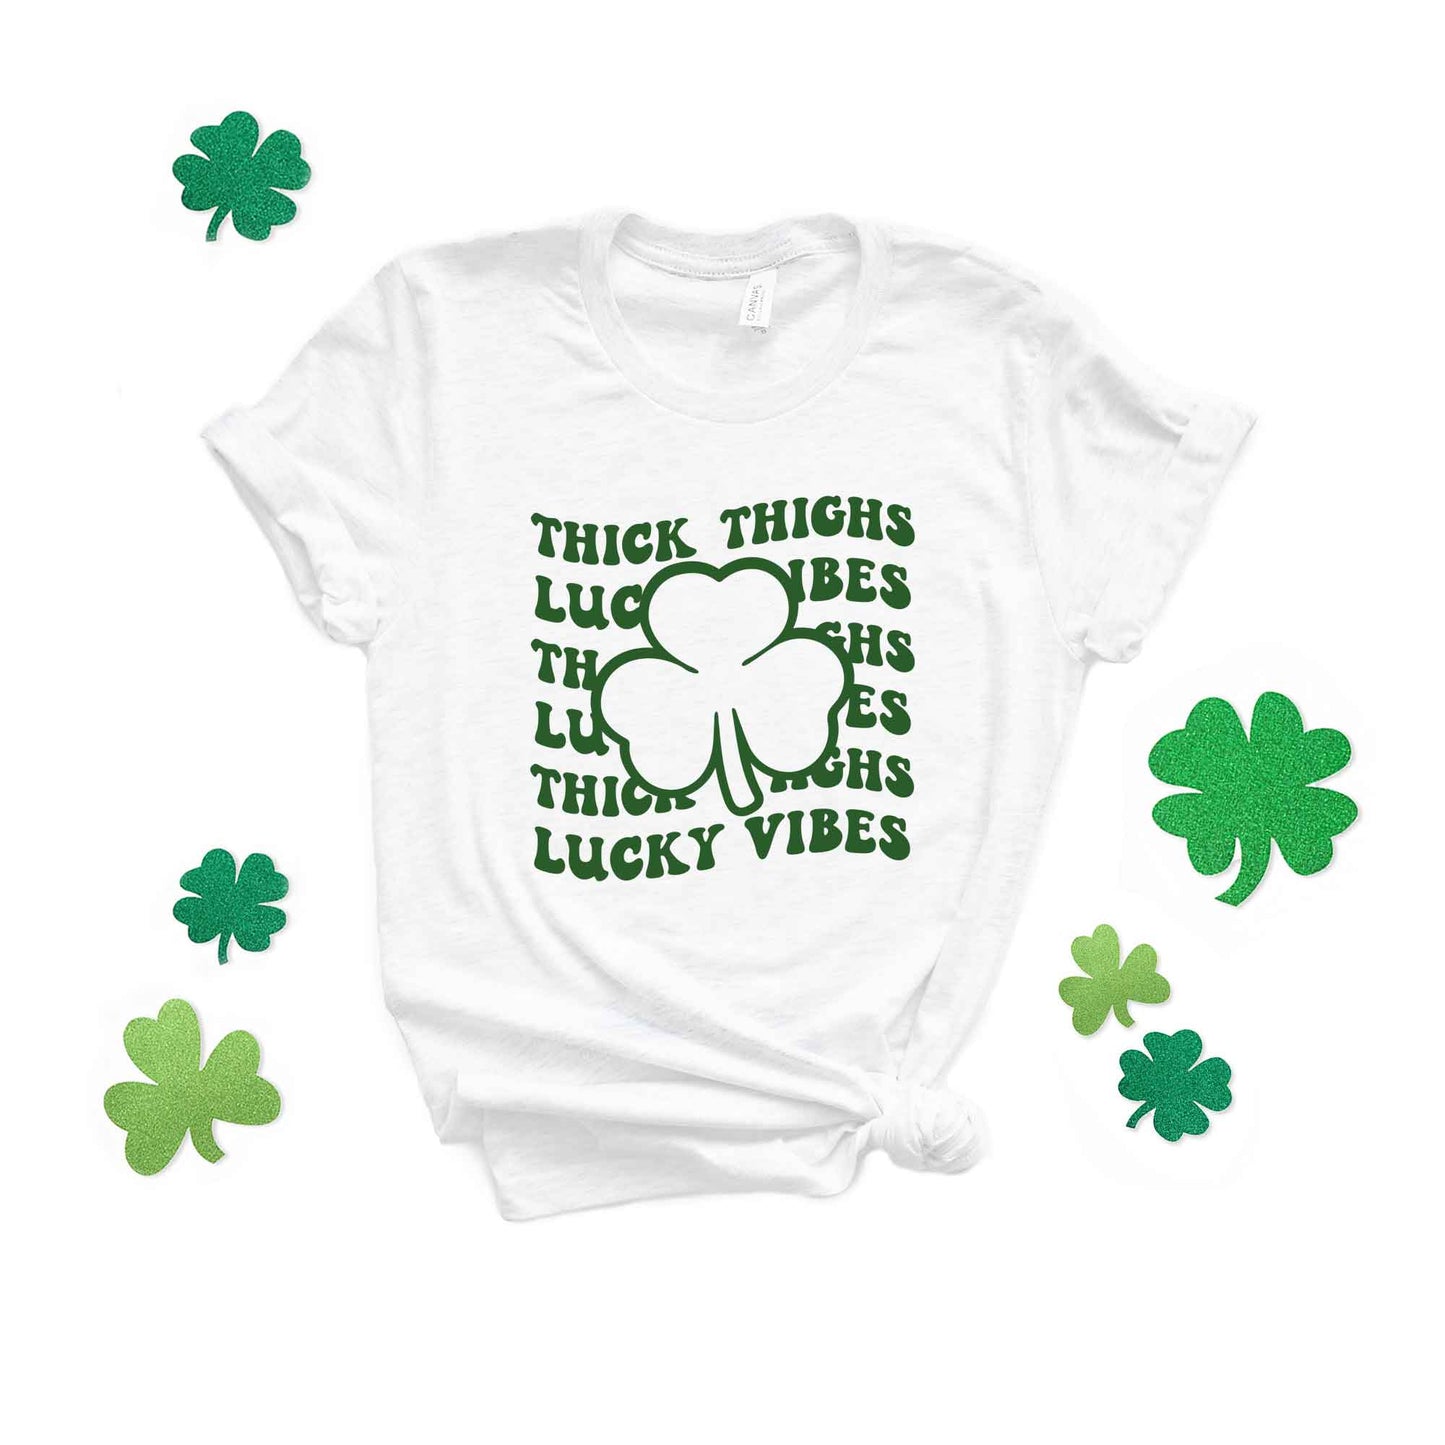 Thick Thighs Lucky Vibes | Short Sleeve Graphic Tee